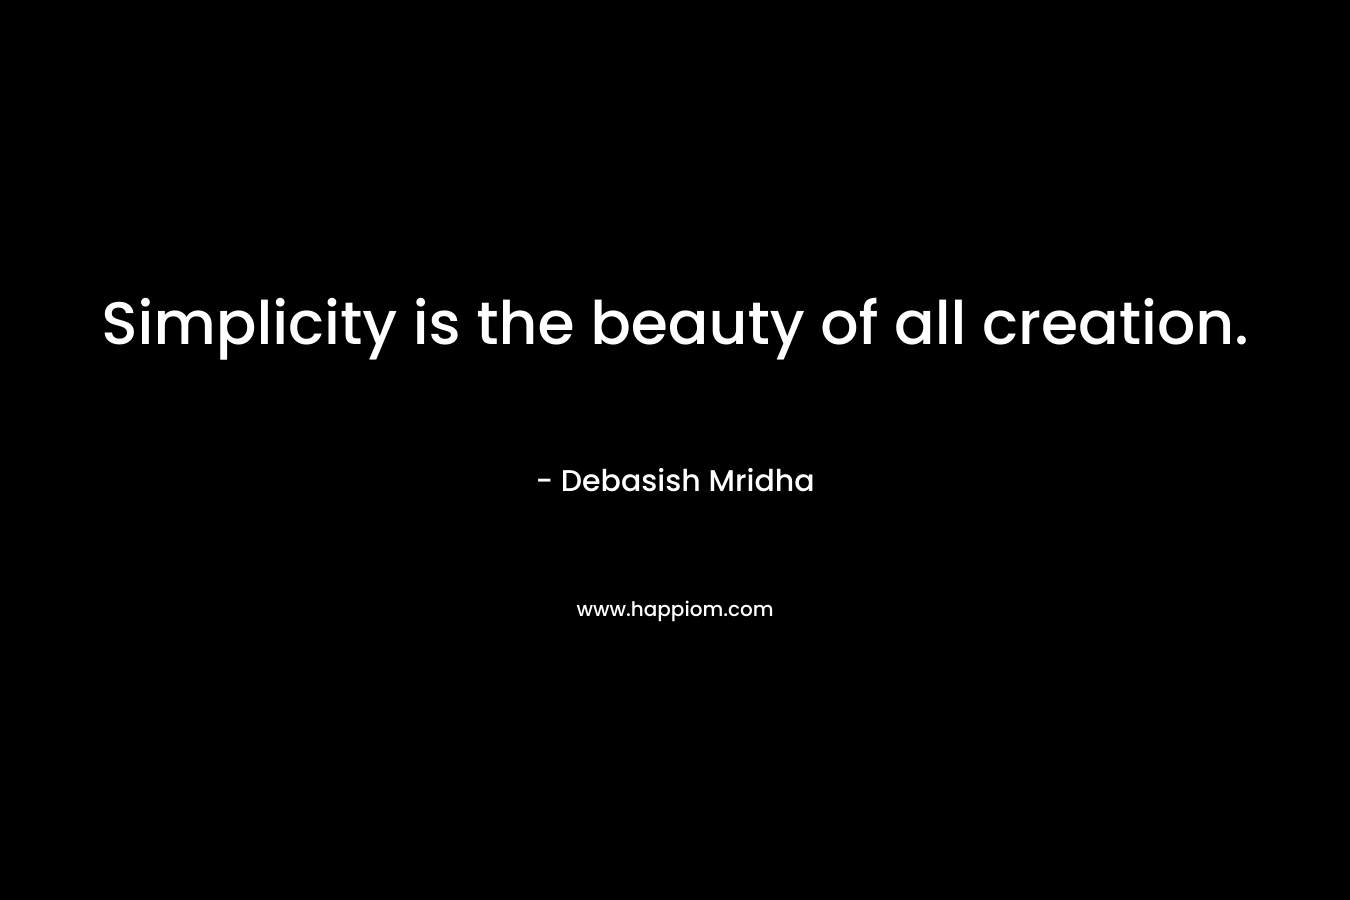 Simplicity is the beauty of all creation.